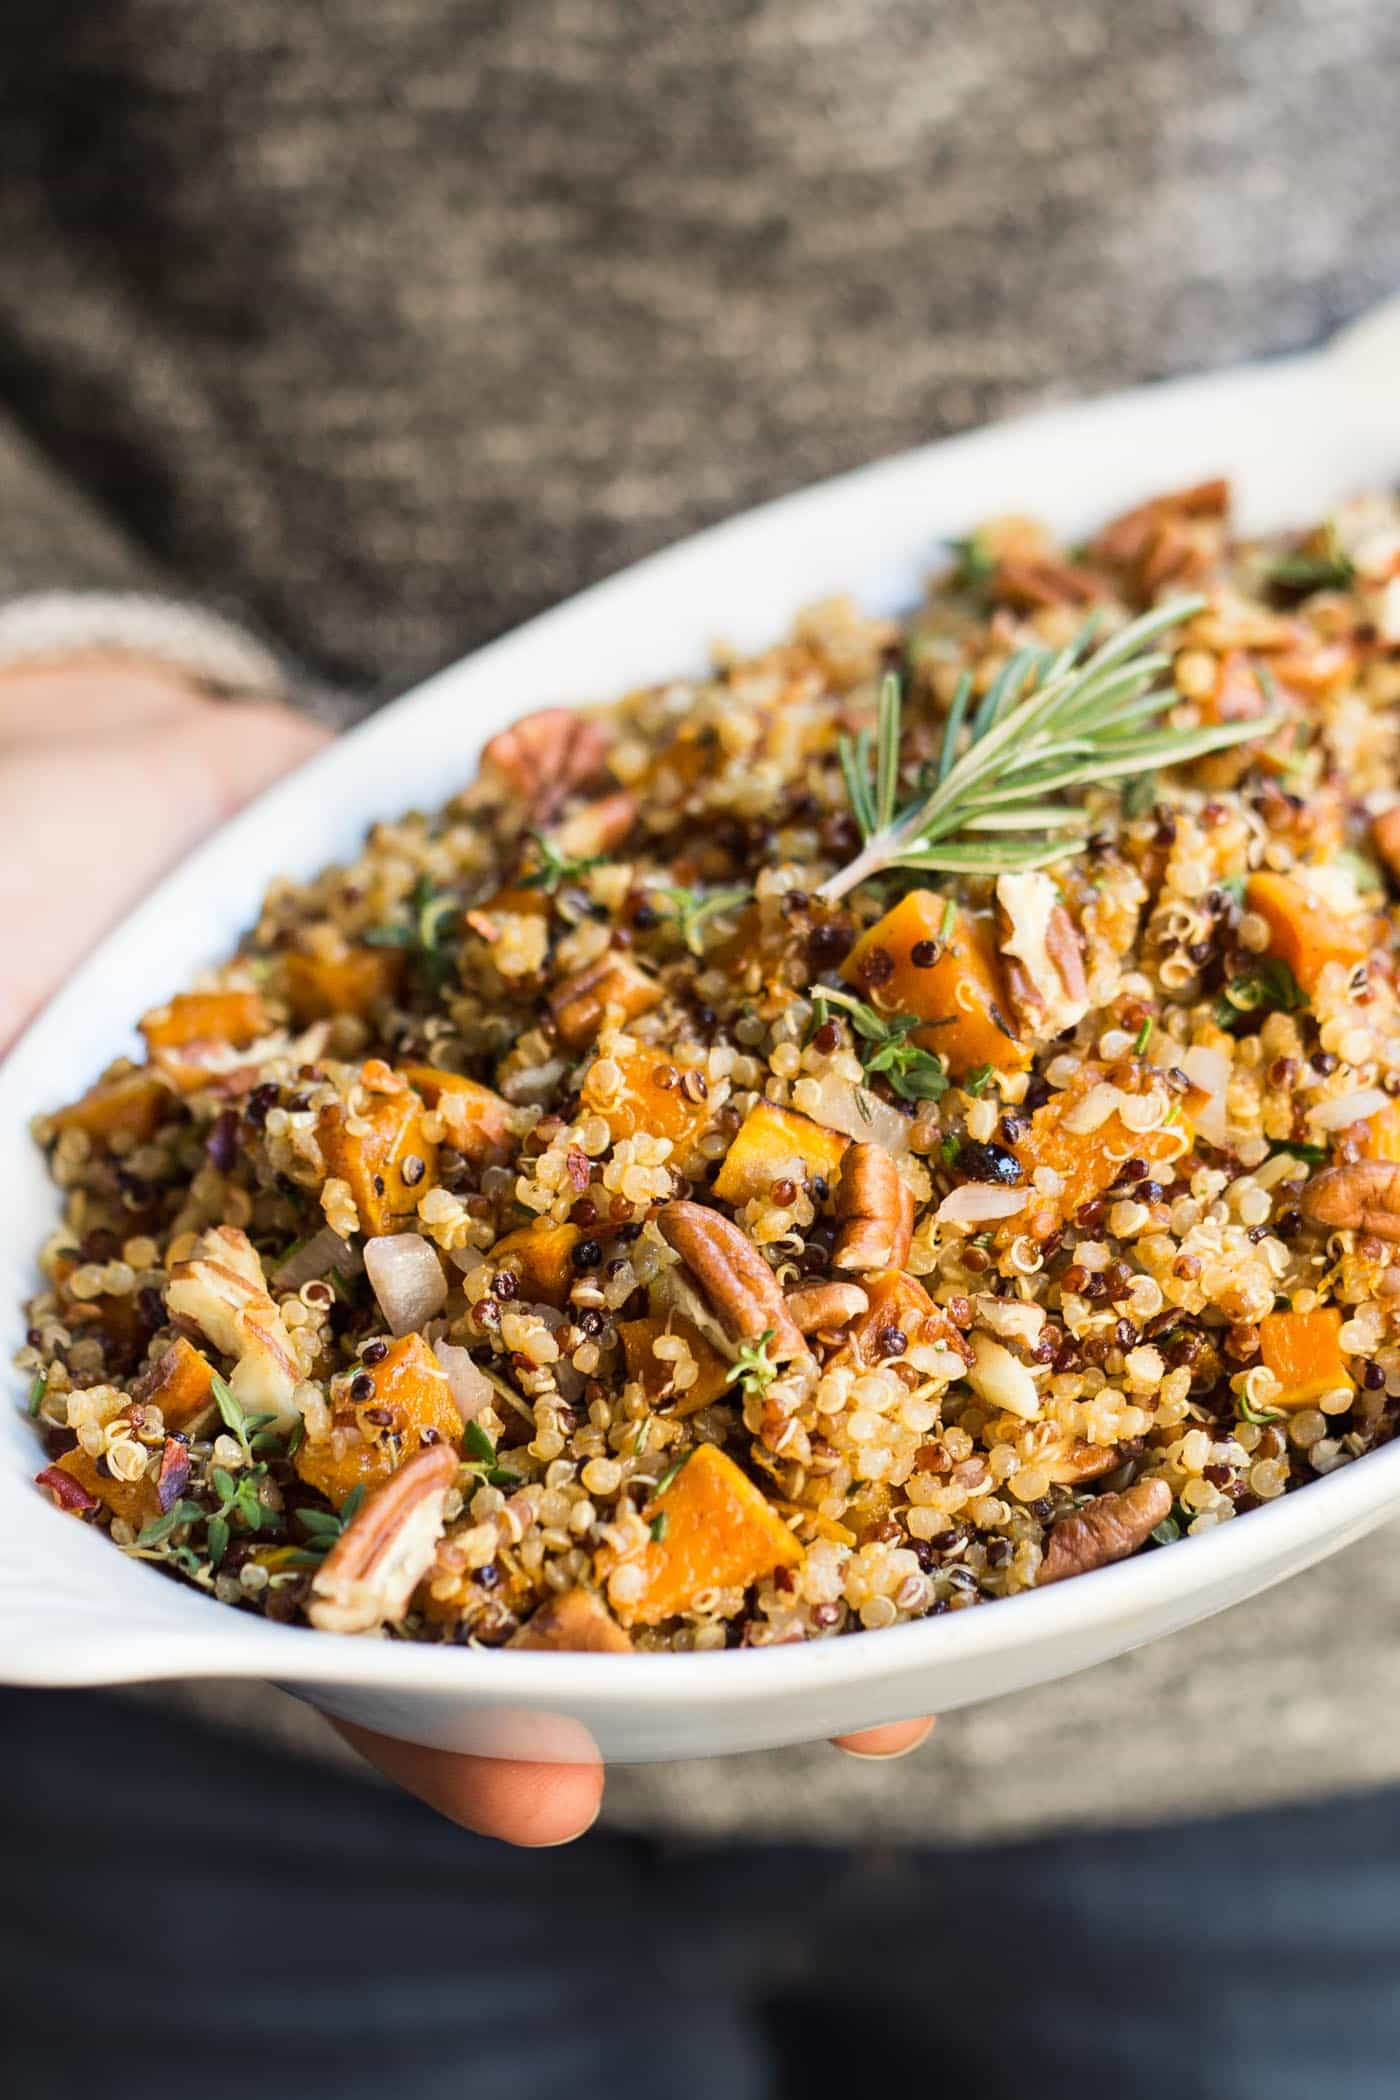 Healthy Stuffing Recipes For Thanksgiving
 Easy Quinoa Stuffing Recipe Simply Quinoa